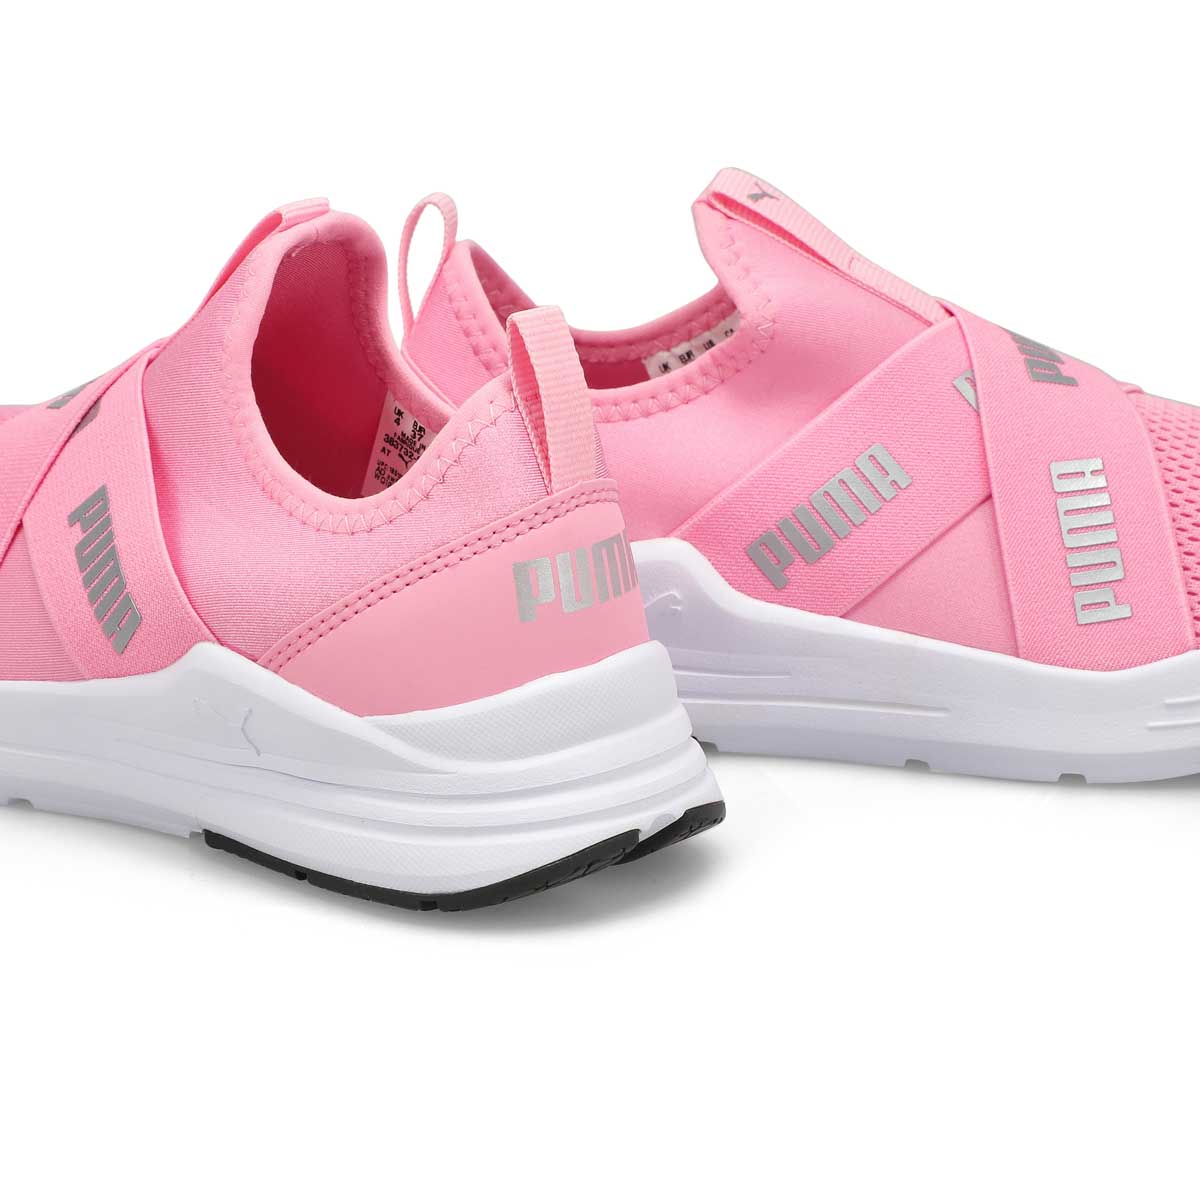 Girl's Puma Wired Slip On Sneaker - Pink/Silver